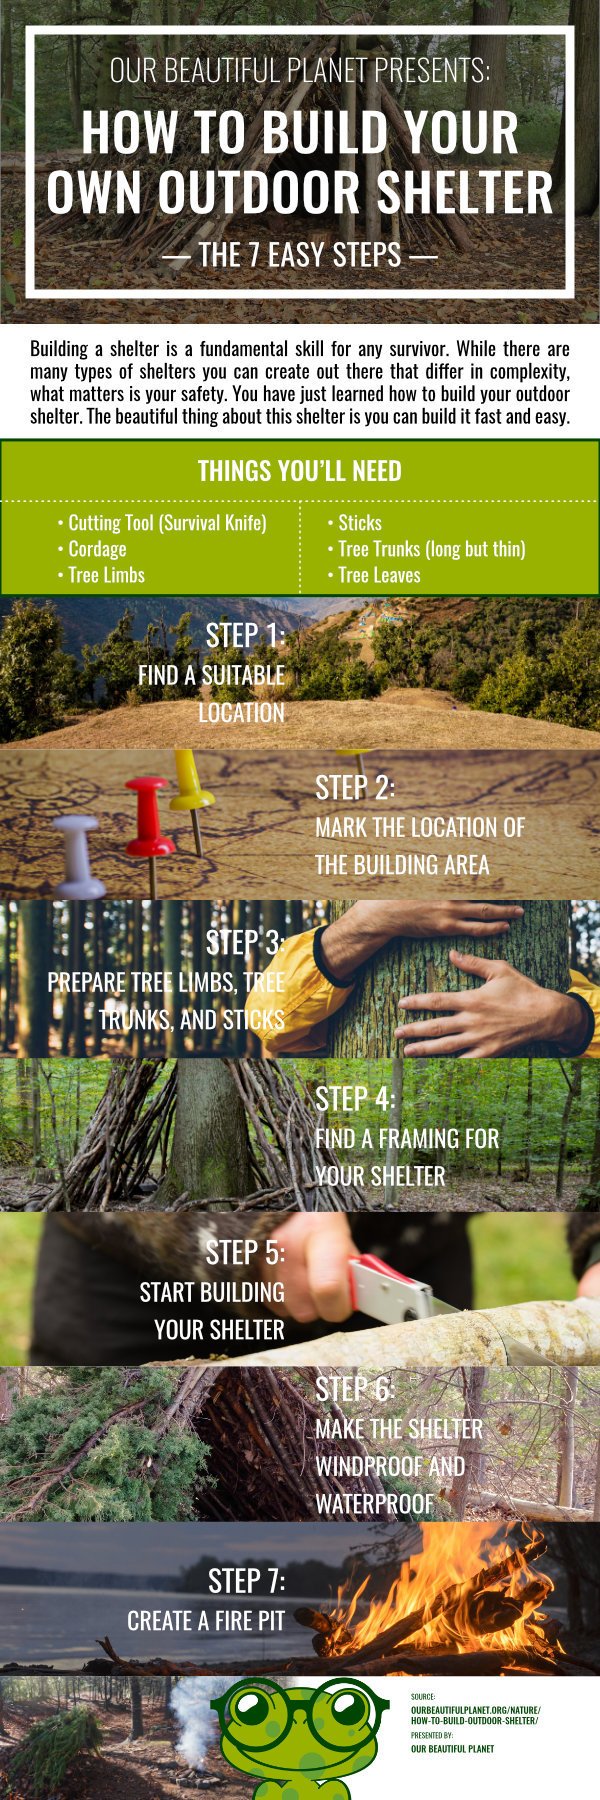 7 Simple Steps To Build Your Own Outdoor Shelter | Our Beautiful Planet